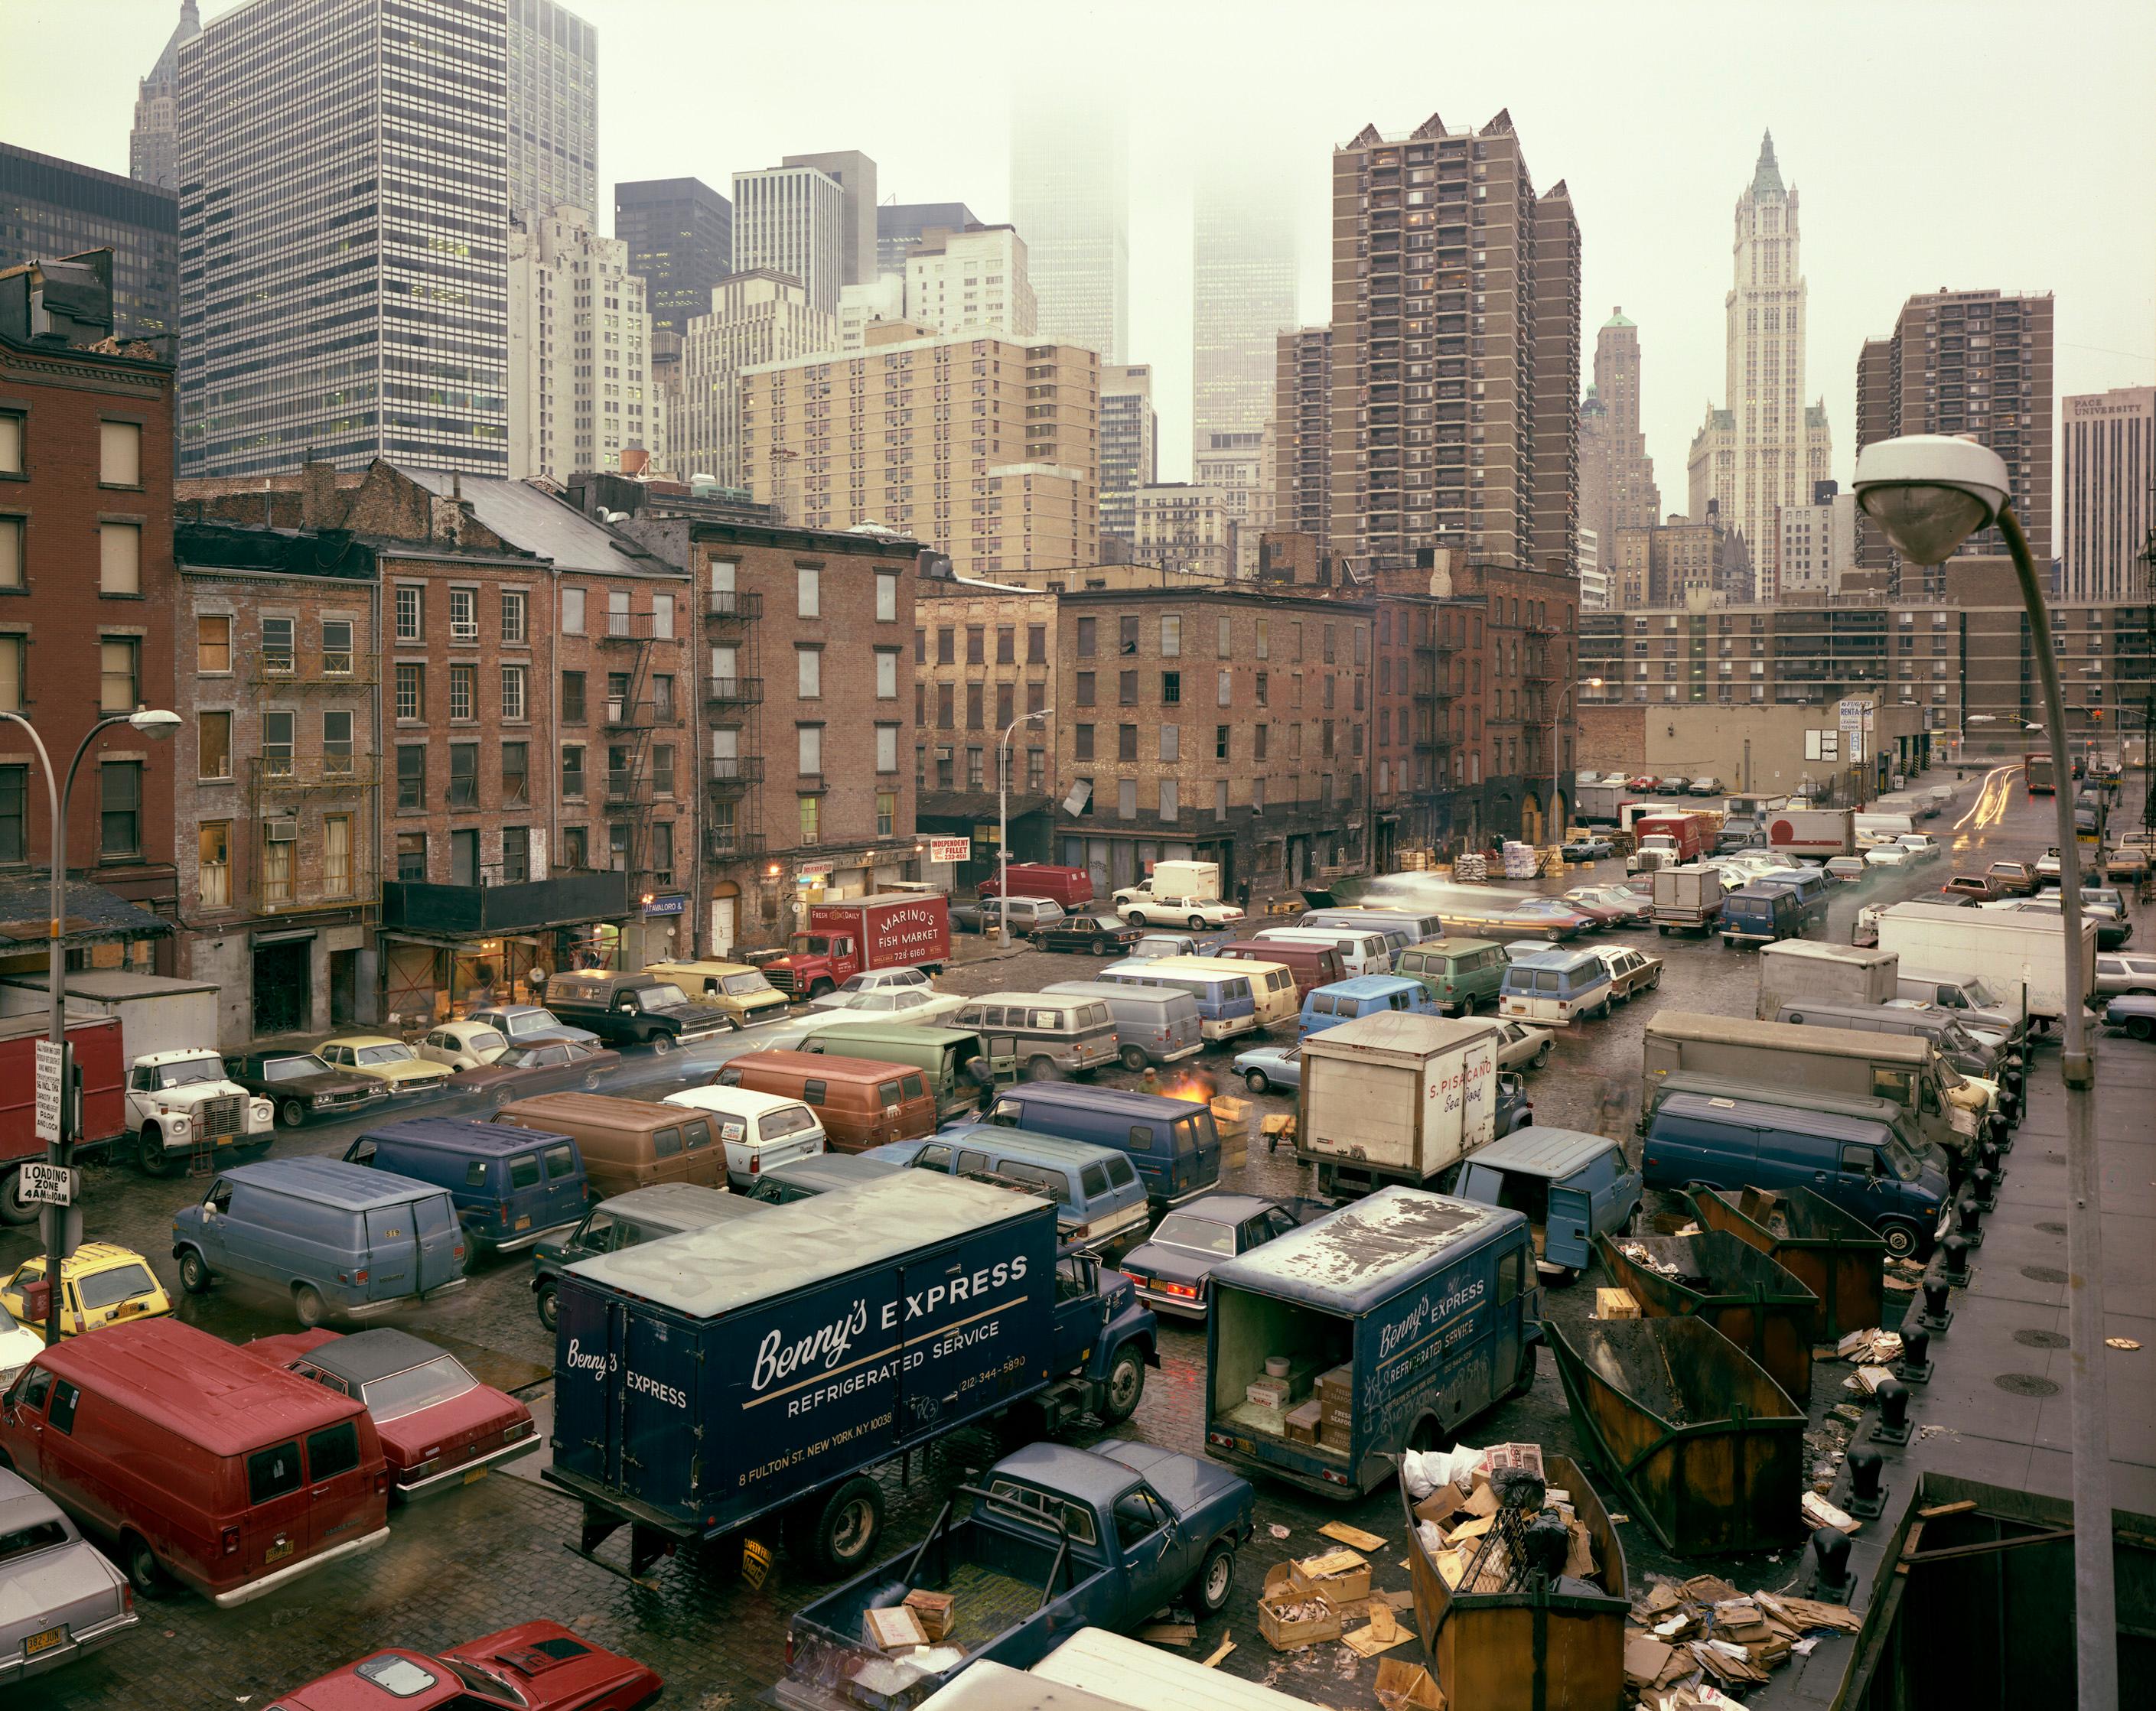 Andrew Moore Color Photograph - Peck Slip, NYC (50"x60")